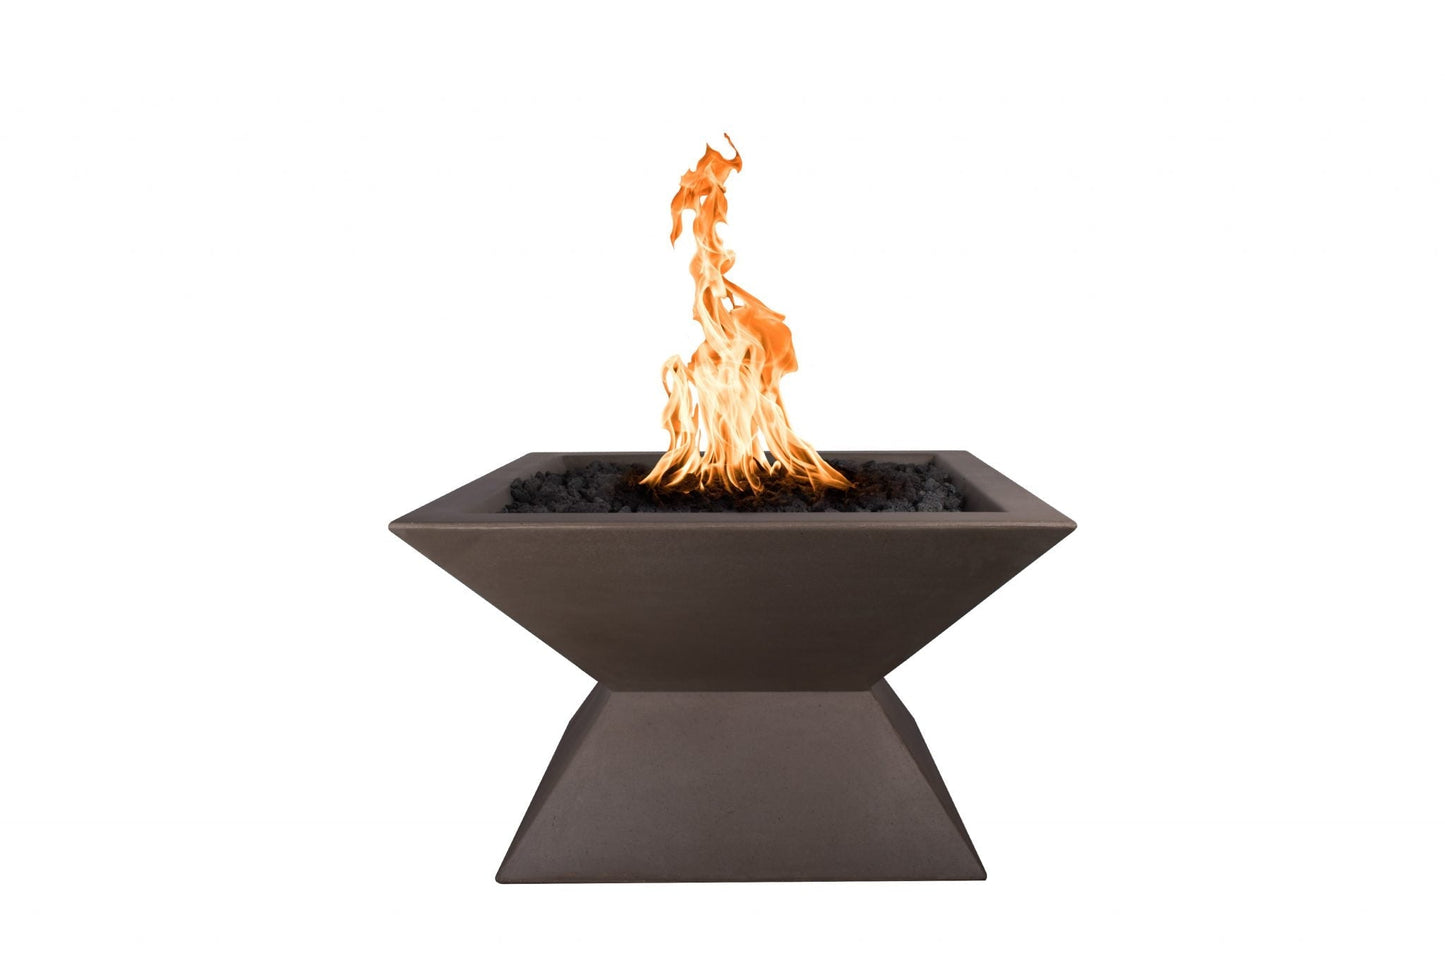 The Outdoor Plus Square Uxmal 30" Metallic Bronze GFRC Concrete Liquid Propane Fire Pit with Match Lit with Flame Sense Ignition